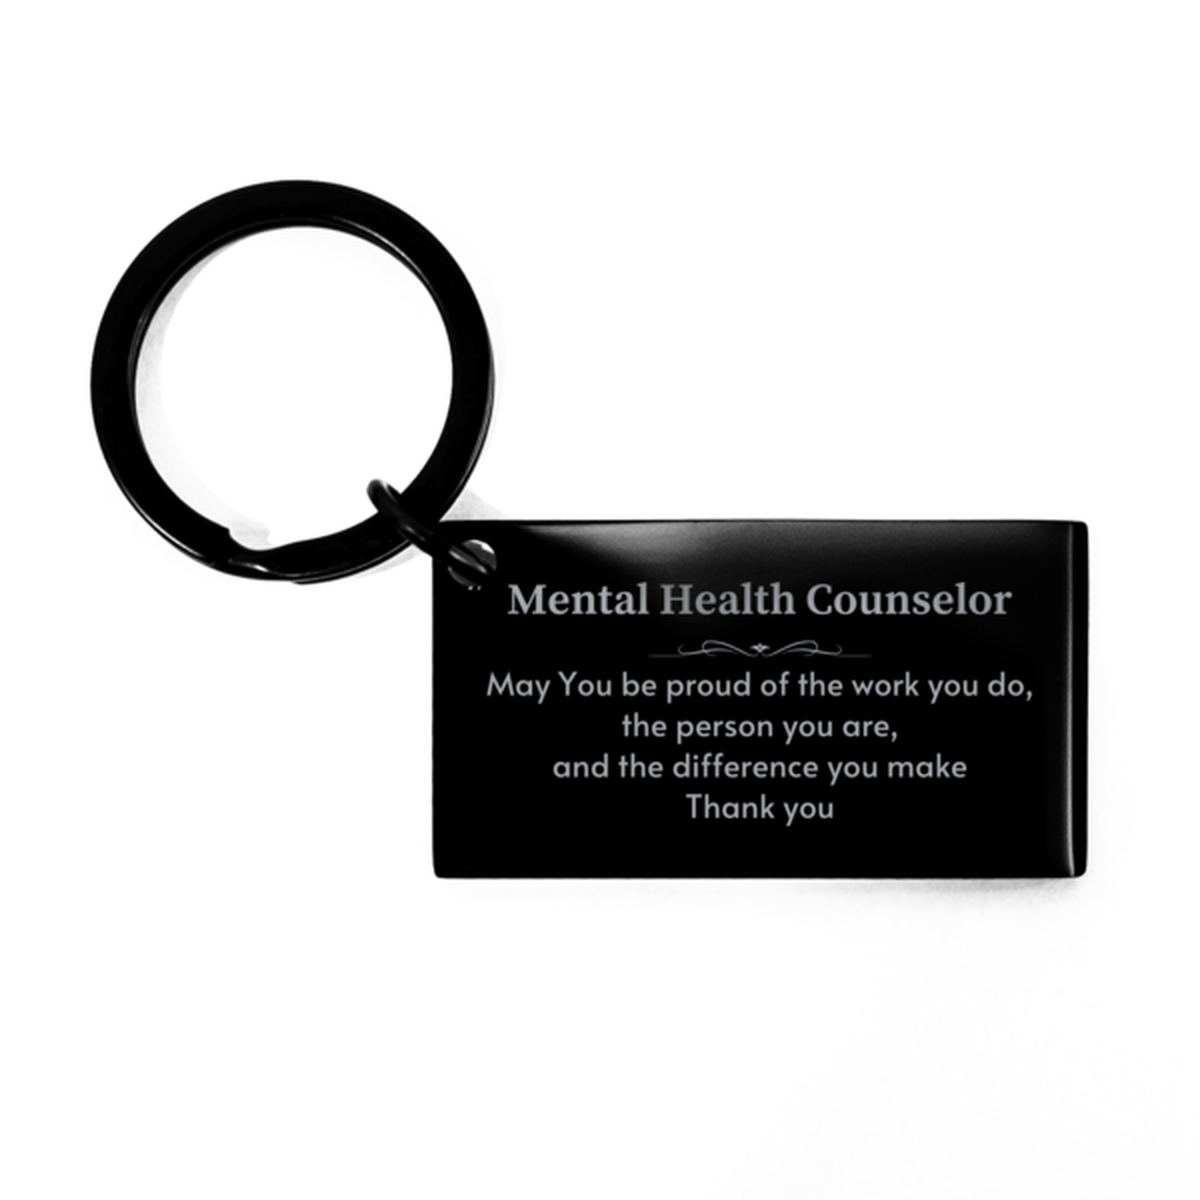 Heartwarming Keychain Retirement Coworkers Gifts for Mental Health Counselor, Optometrist May You be proud of the work you do, the person you are Gifts for Boss Men Women Friends